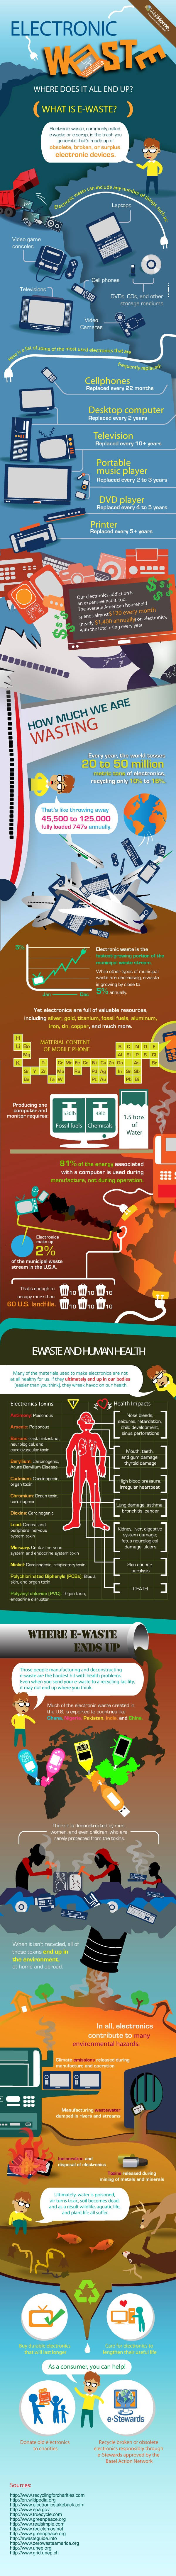 Electronic Waste Where Does it All End Up - Infographic